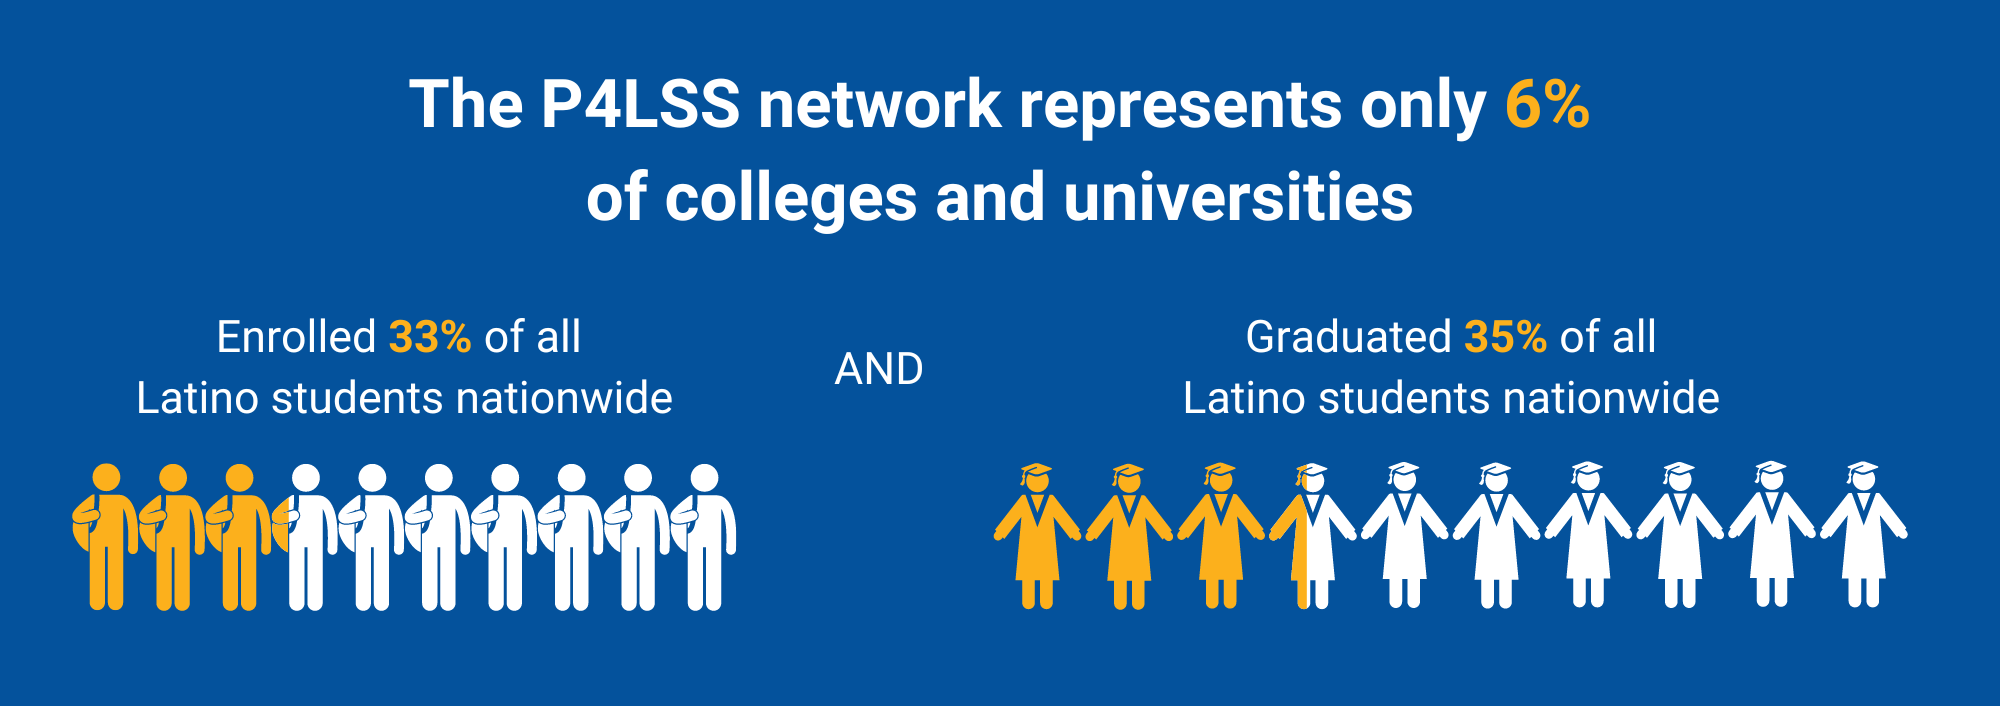 The P4LSS network represents only 6% of colleges and universities, yet it enrolls 33% and graduates 35% of all Latino students.